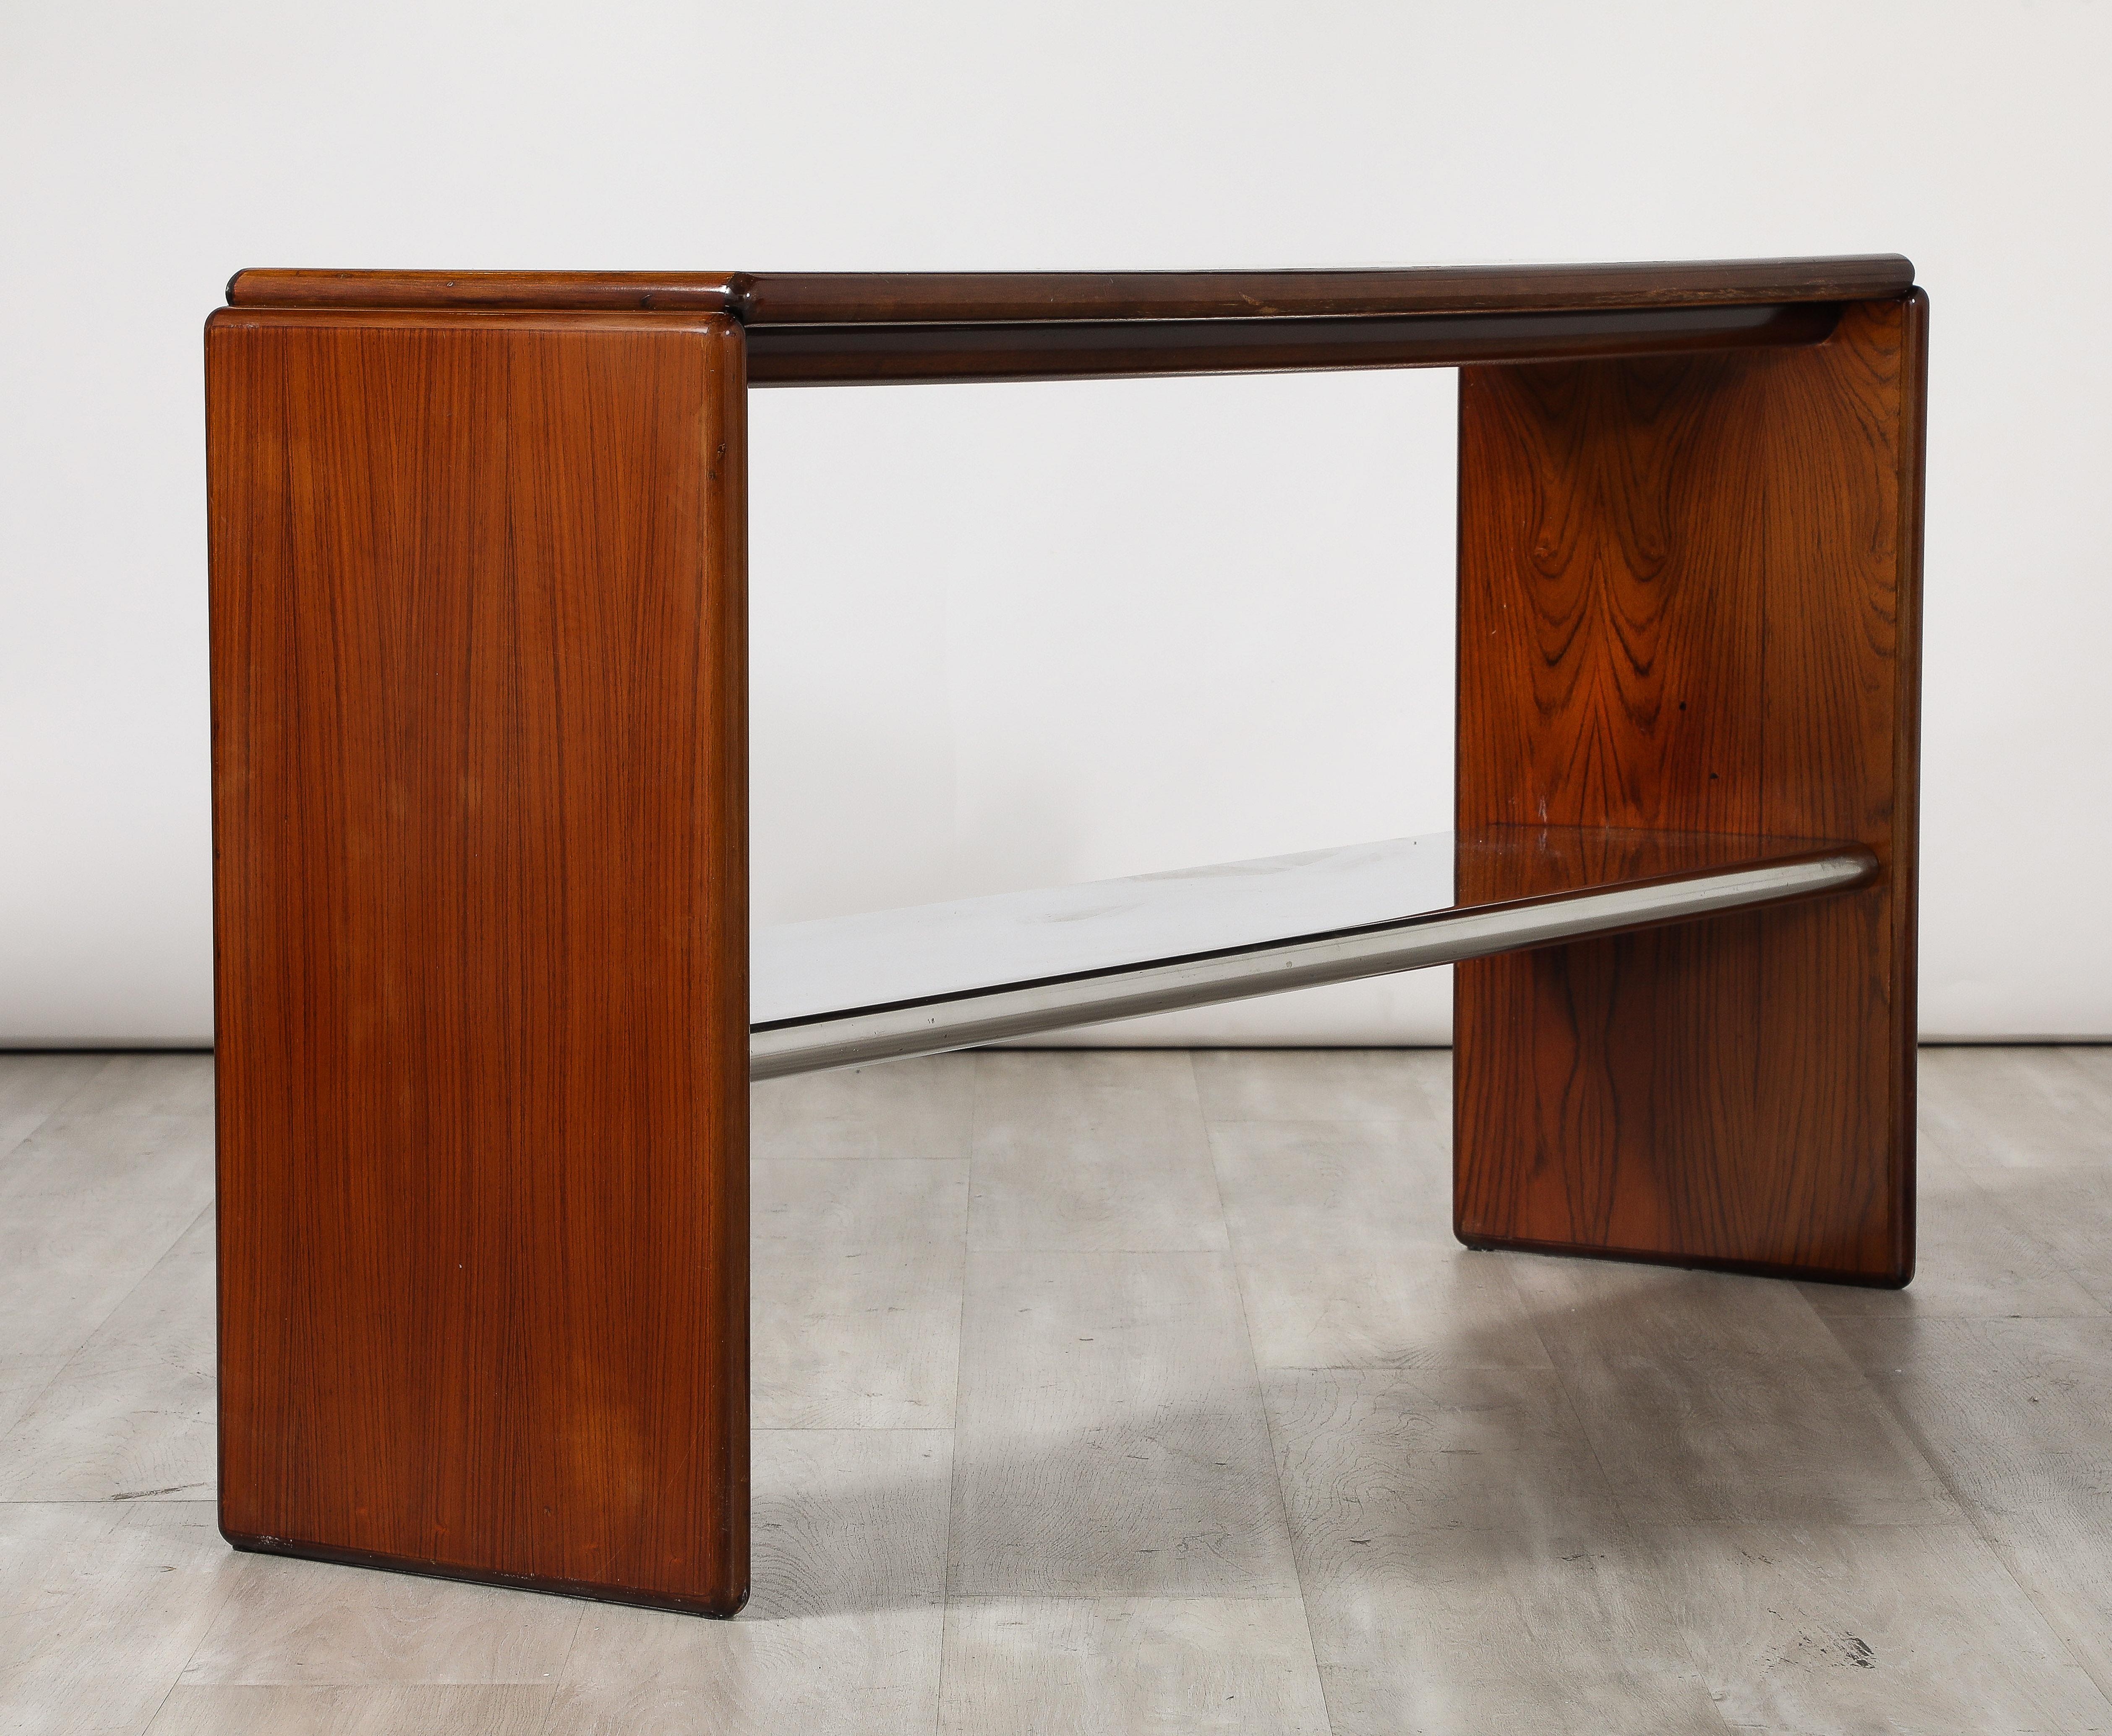 Italian Modernist Wood and Chrome Console Table, Italy, circa 1960 For Sale 4